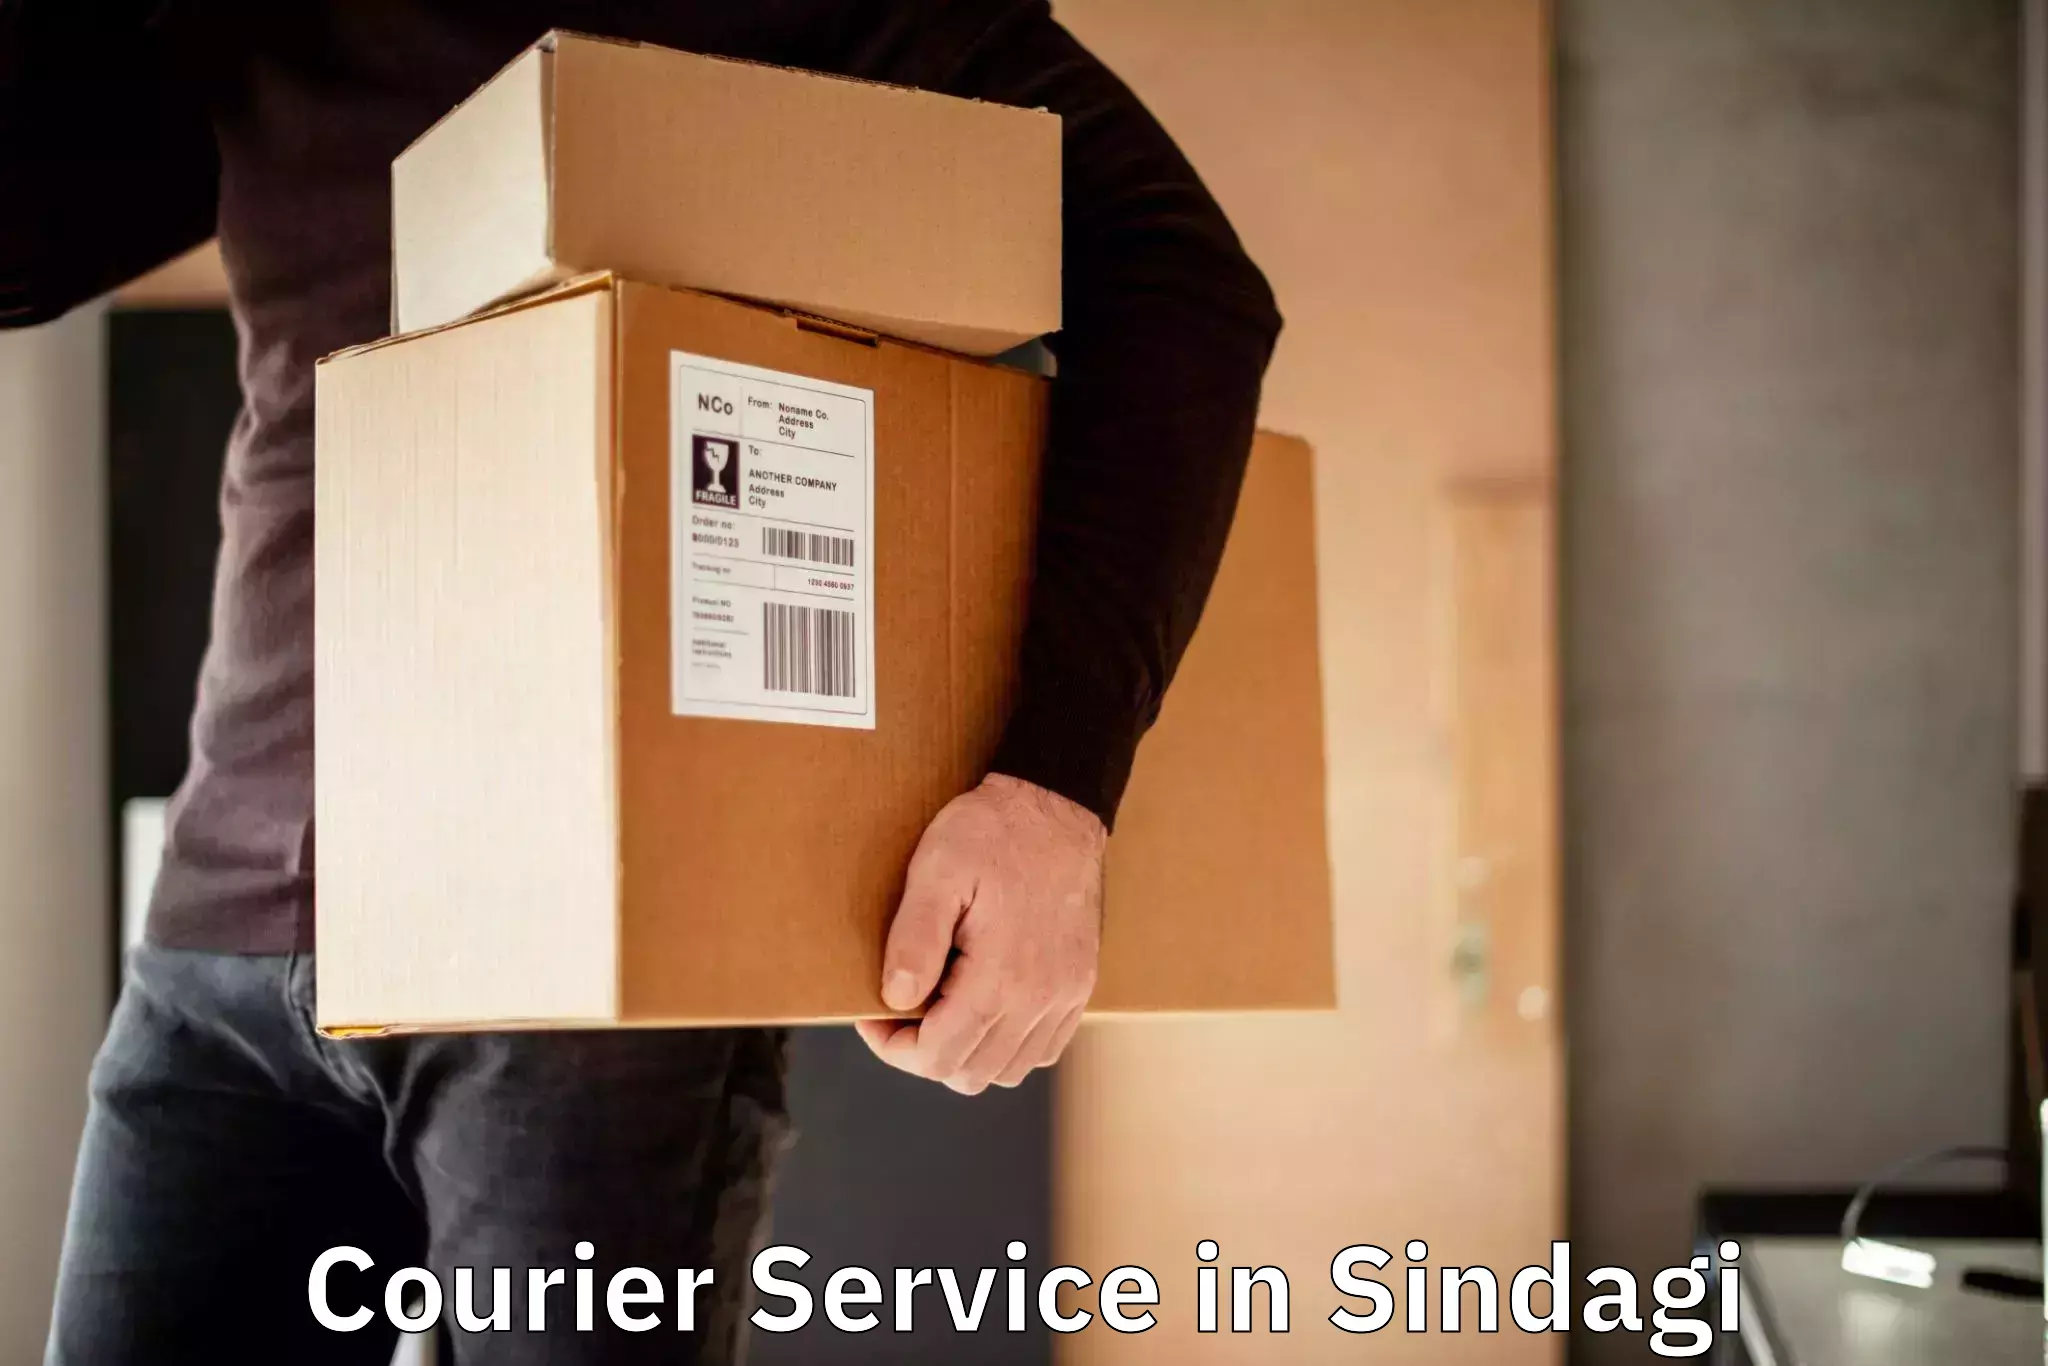 Customer-friendly courier services in Sindagi